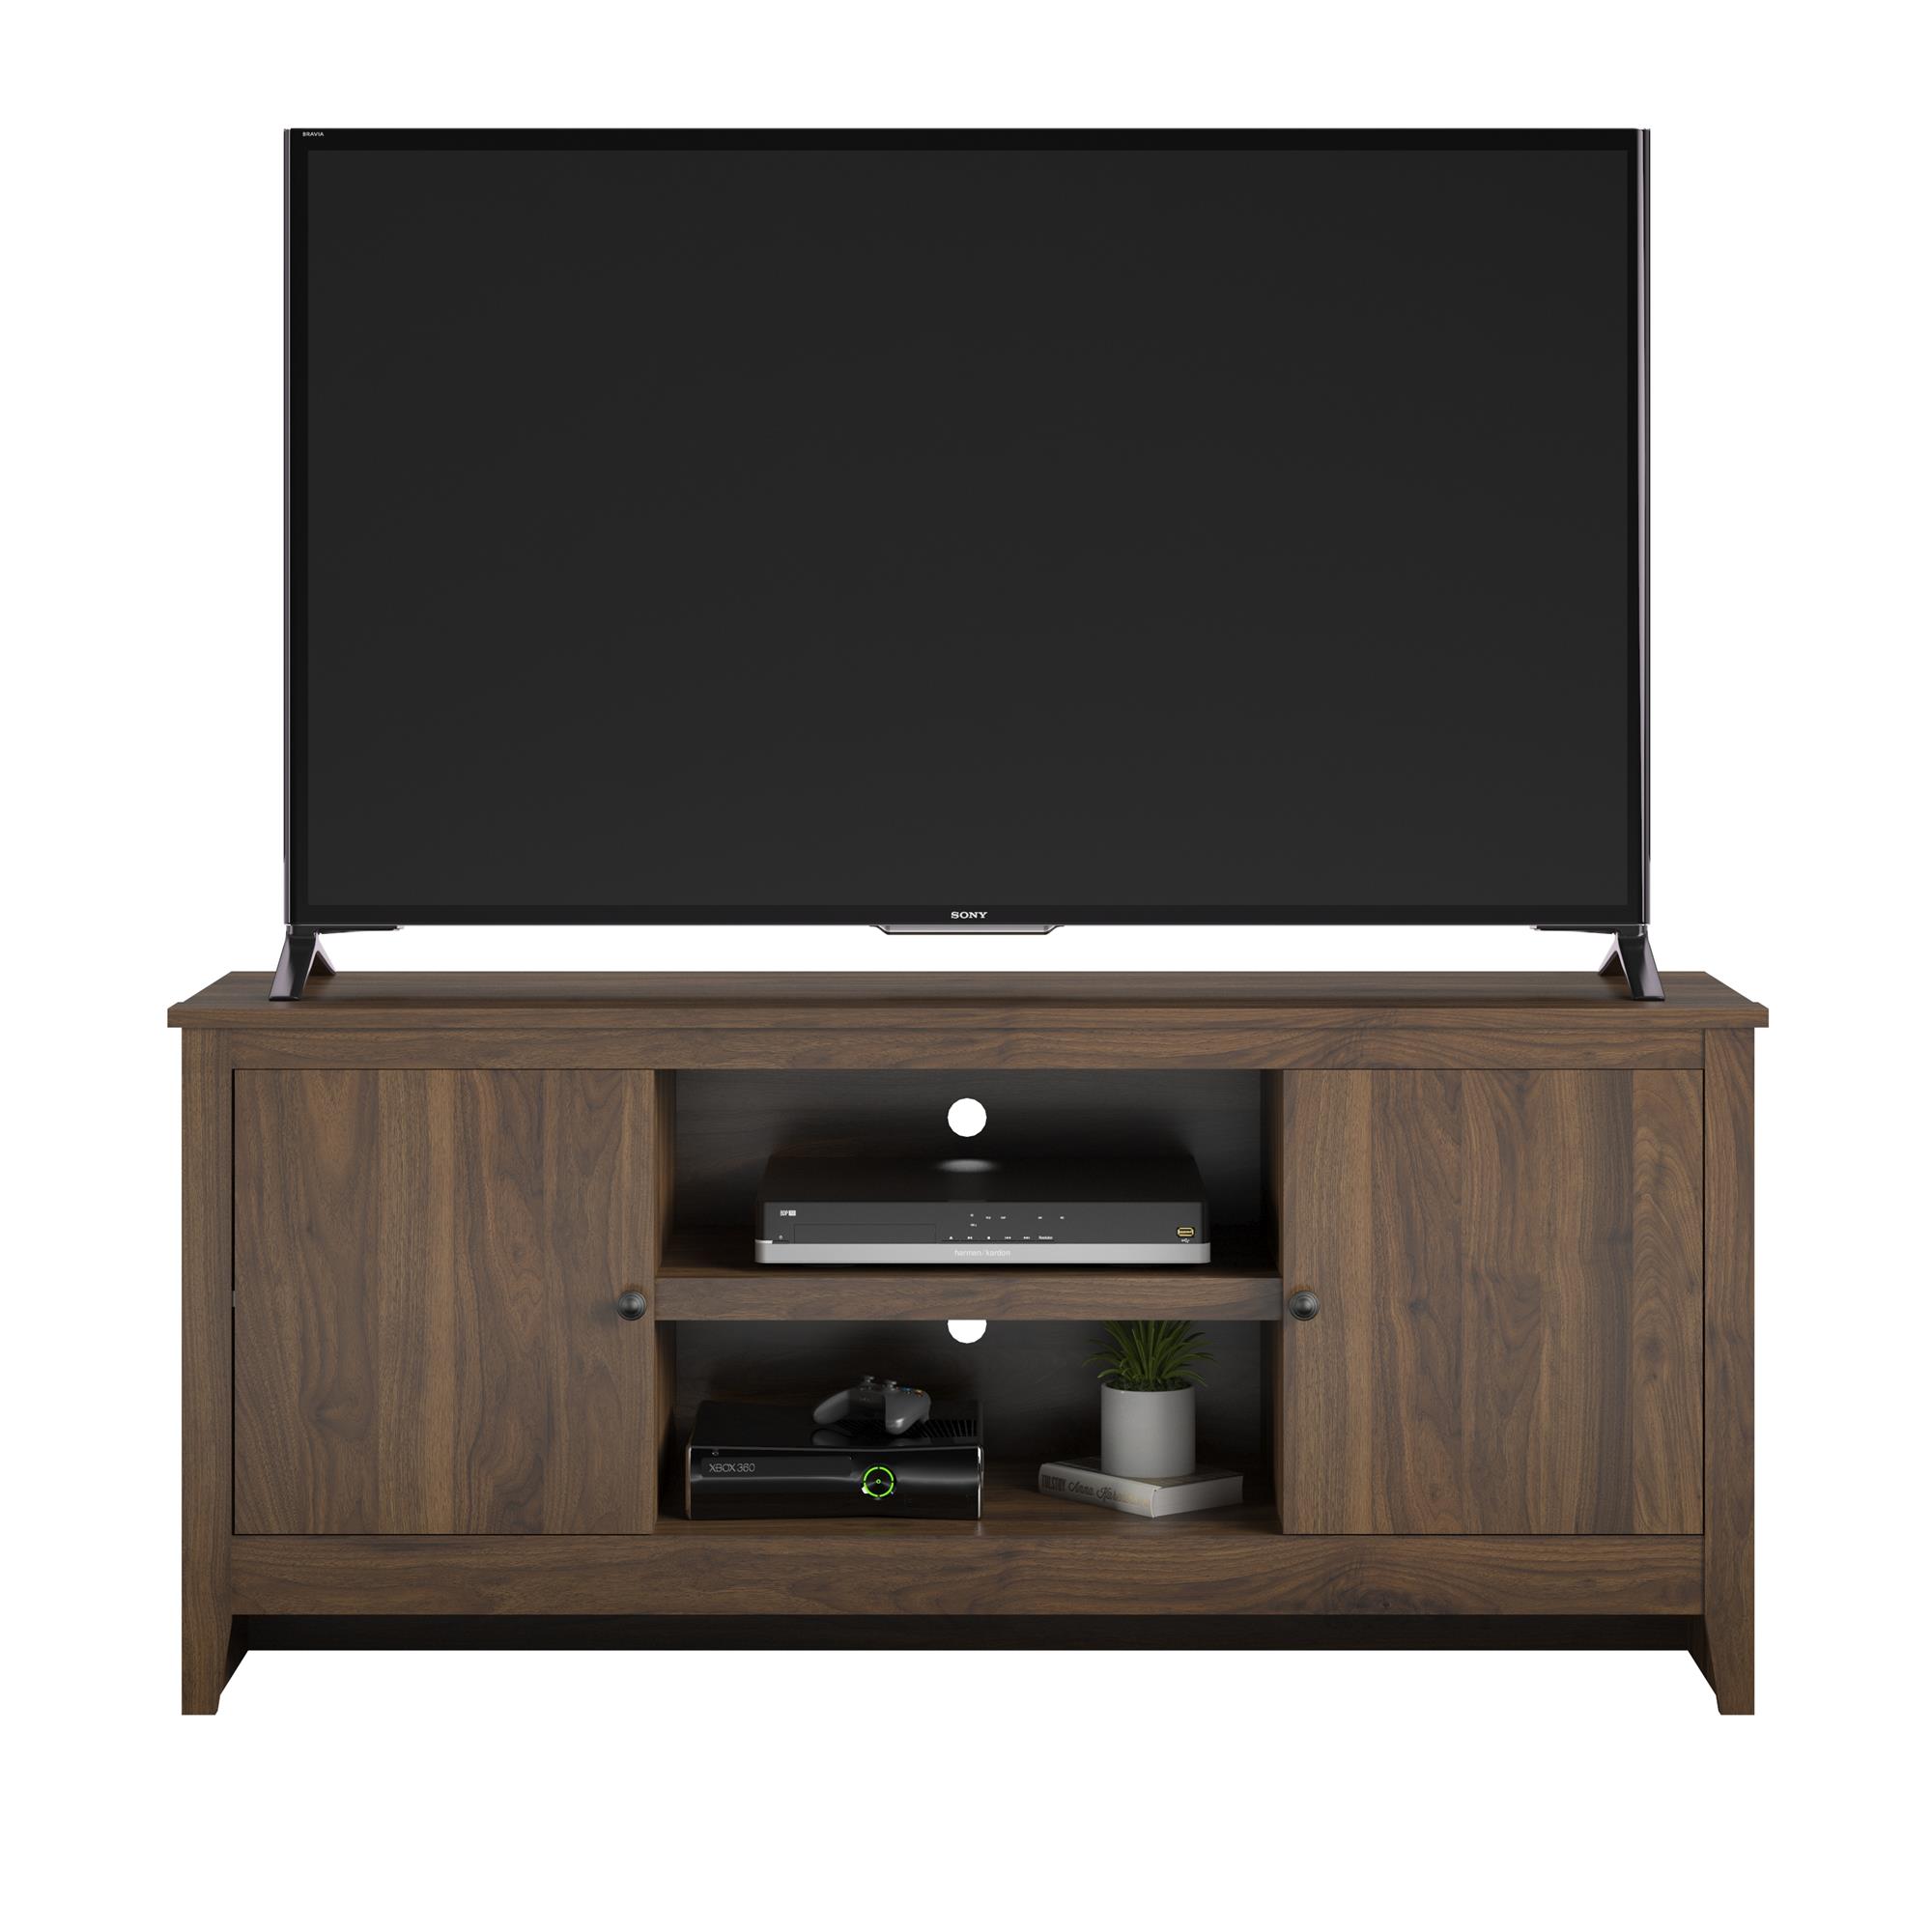 Mainstays TV Stand for TVs up to 65", Walnut - image 2 of 11